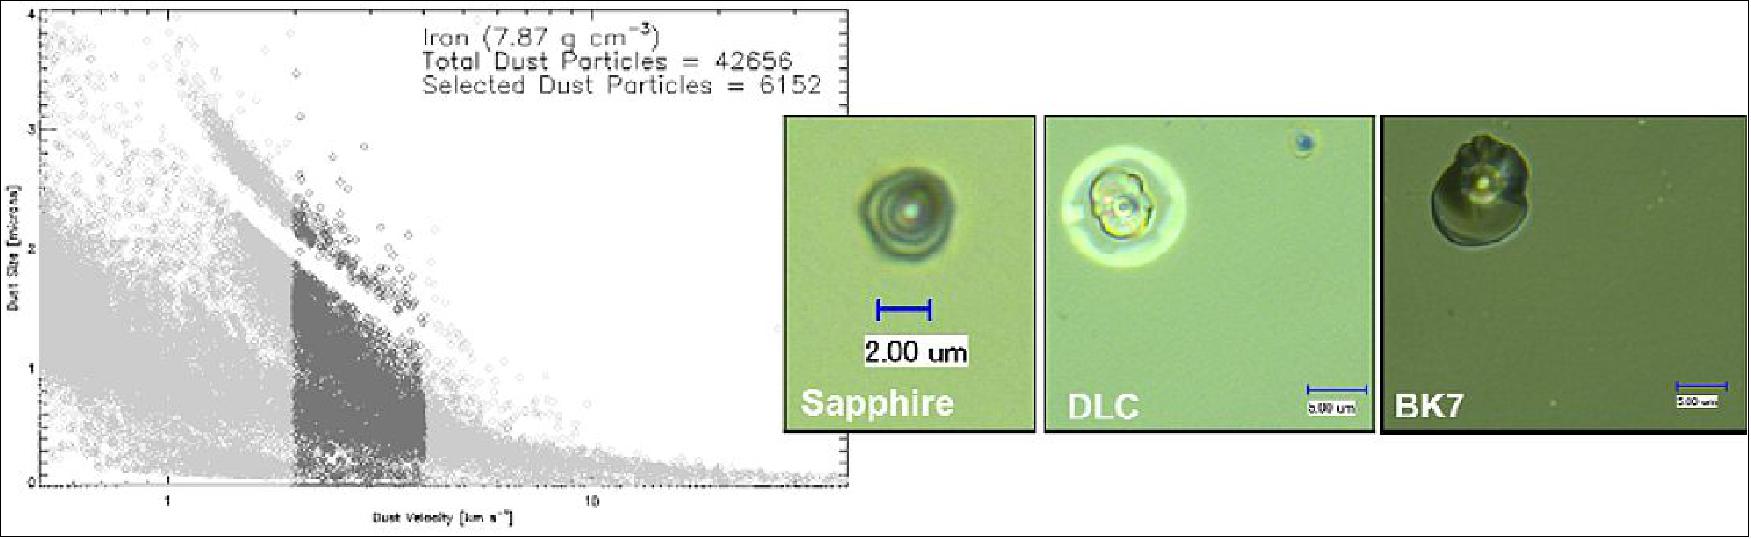 Figure 87: Left: The Size-Velocity distribution of the iron particles used in the WISPR Dust Impact experiment. Right: Examples of crater damage in the 3 glass types used in the experiment (image credit: WISPR collaboration)